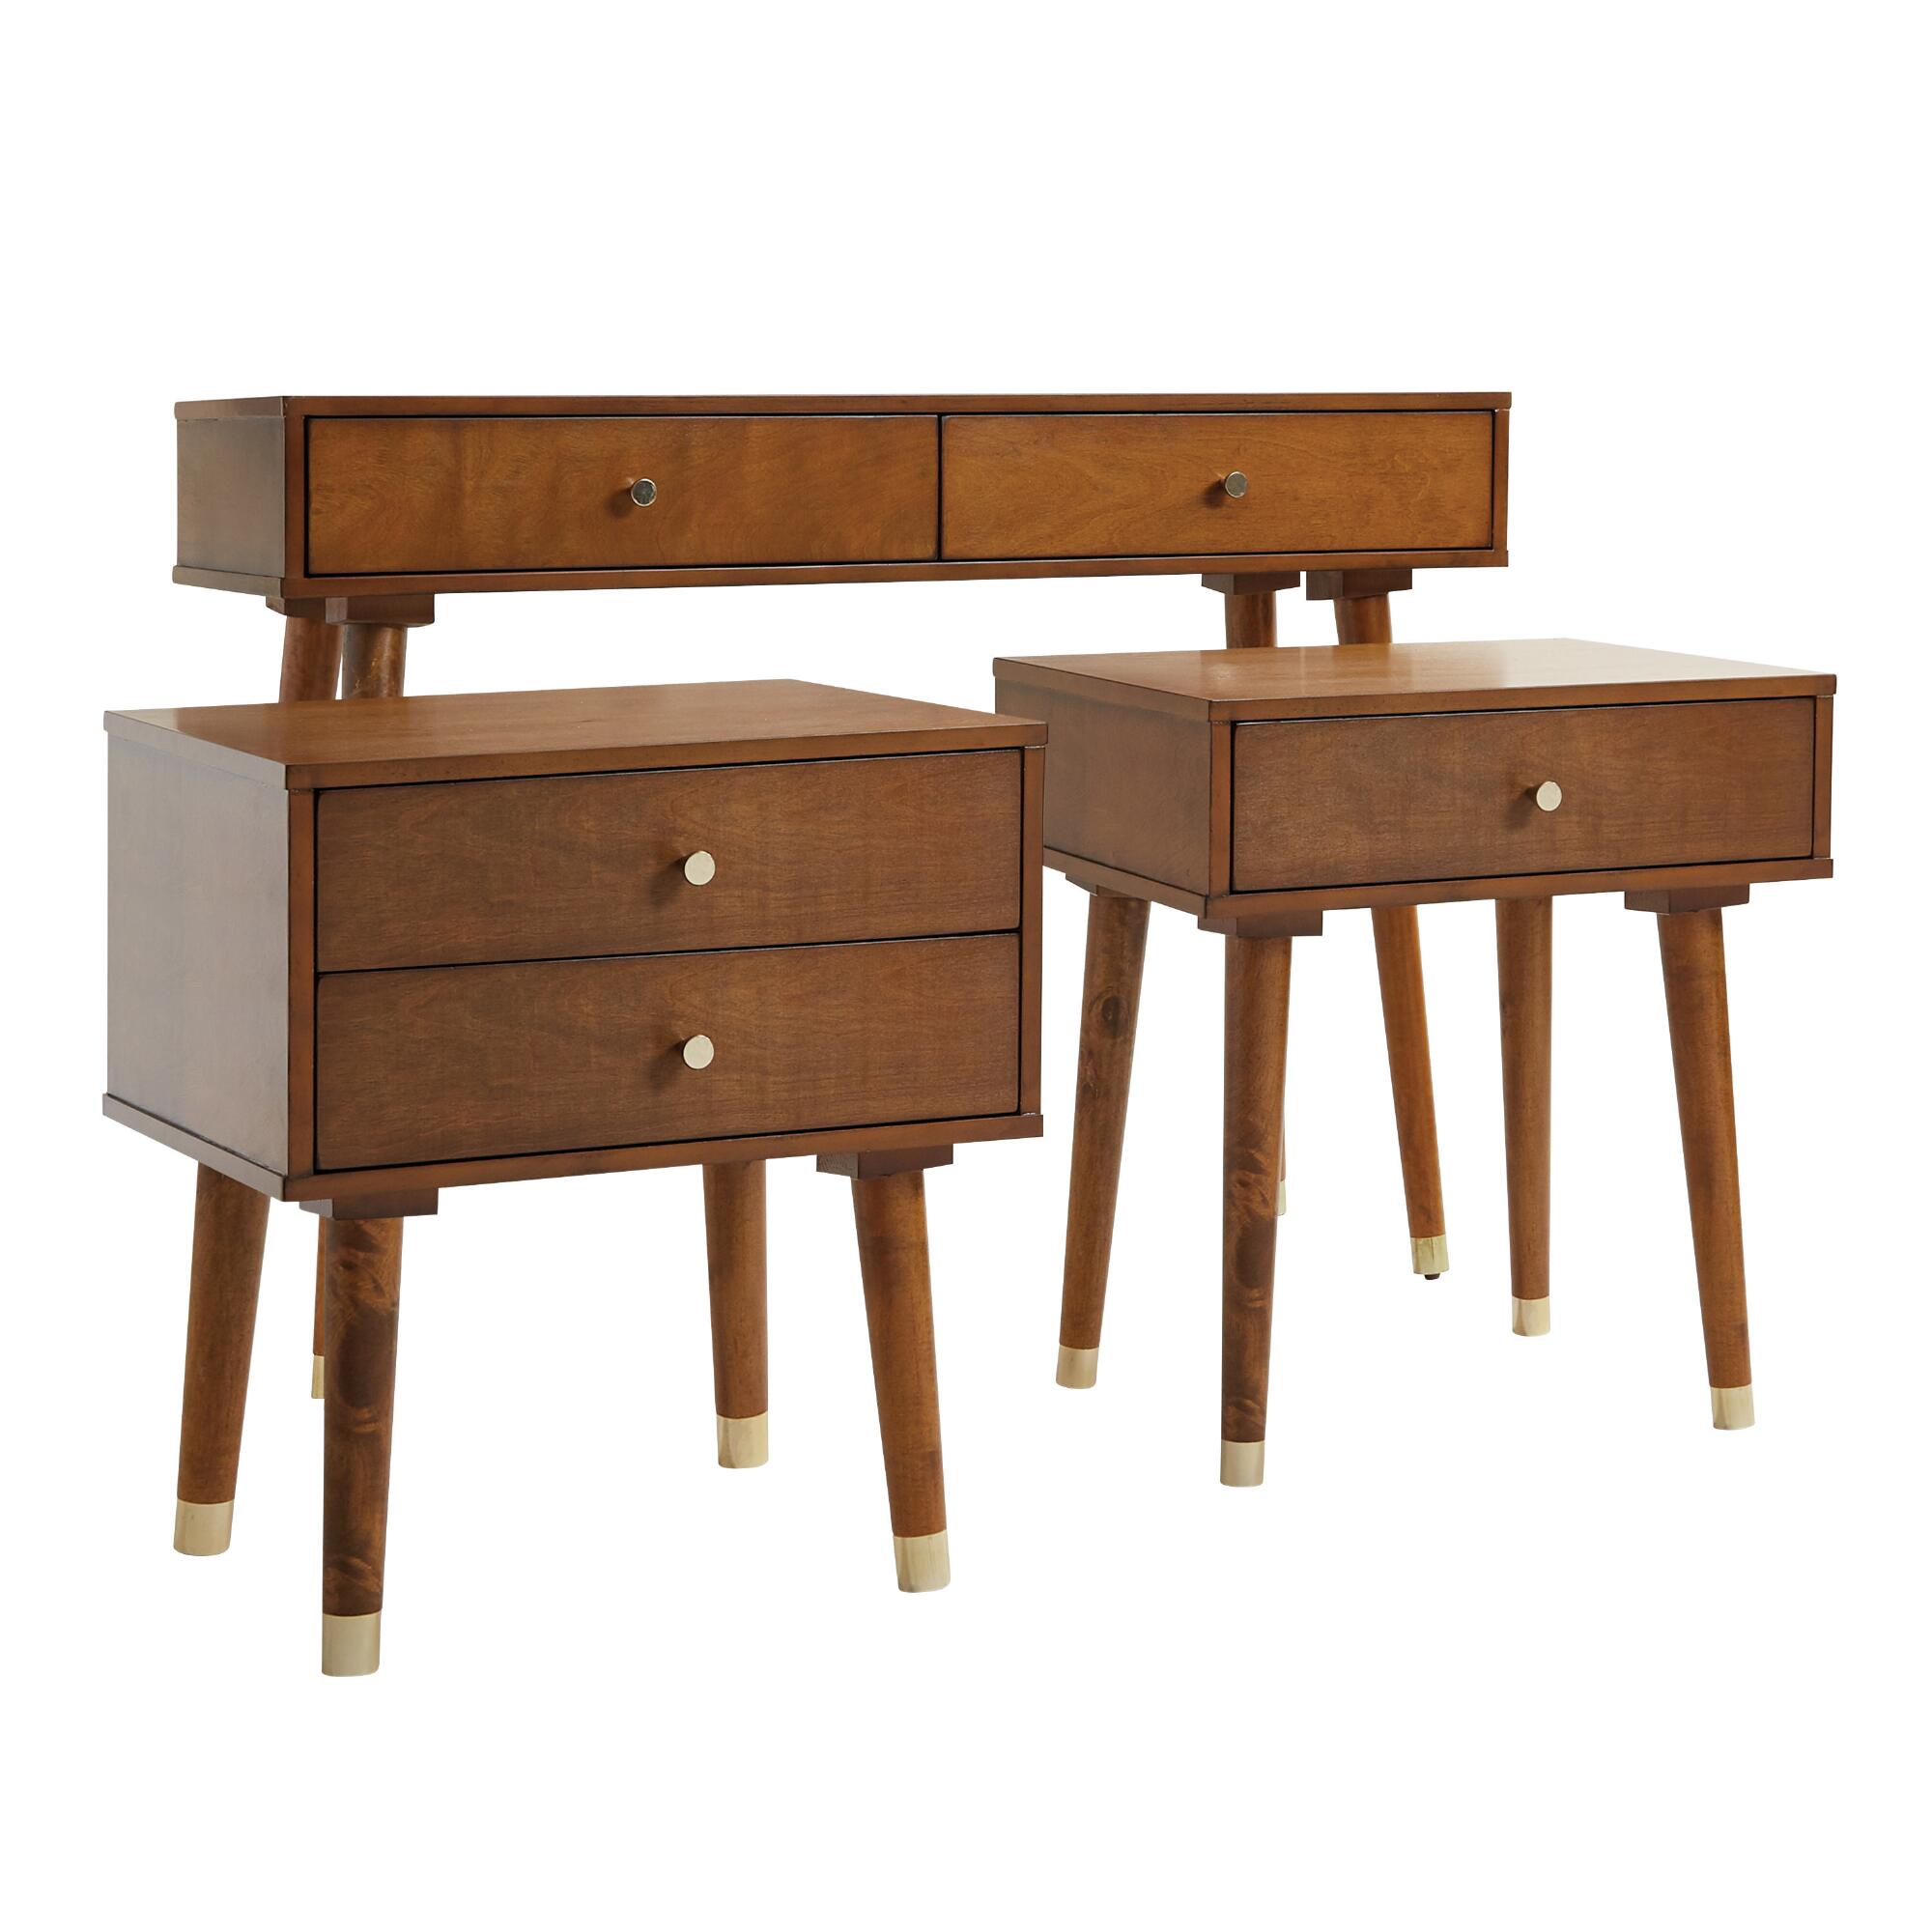 Light Walnut Wood Caleb Table Collection by World Market